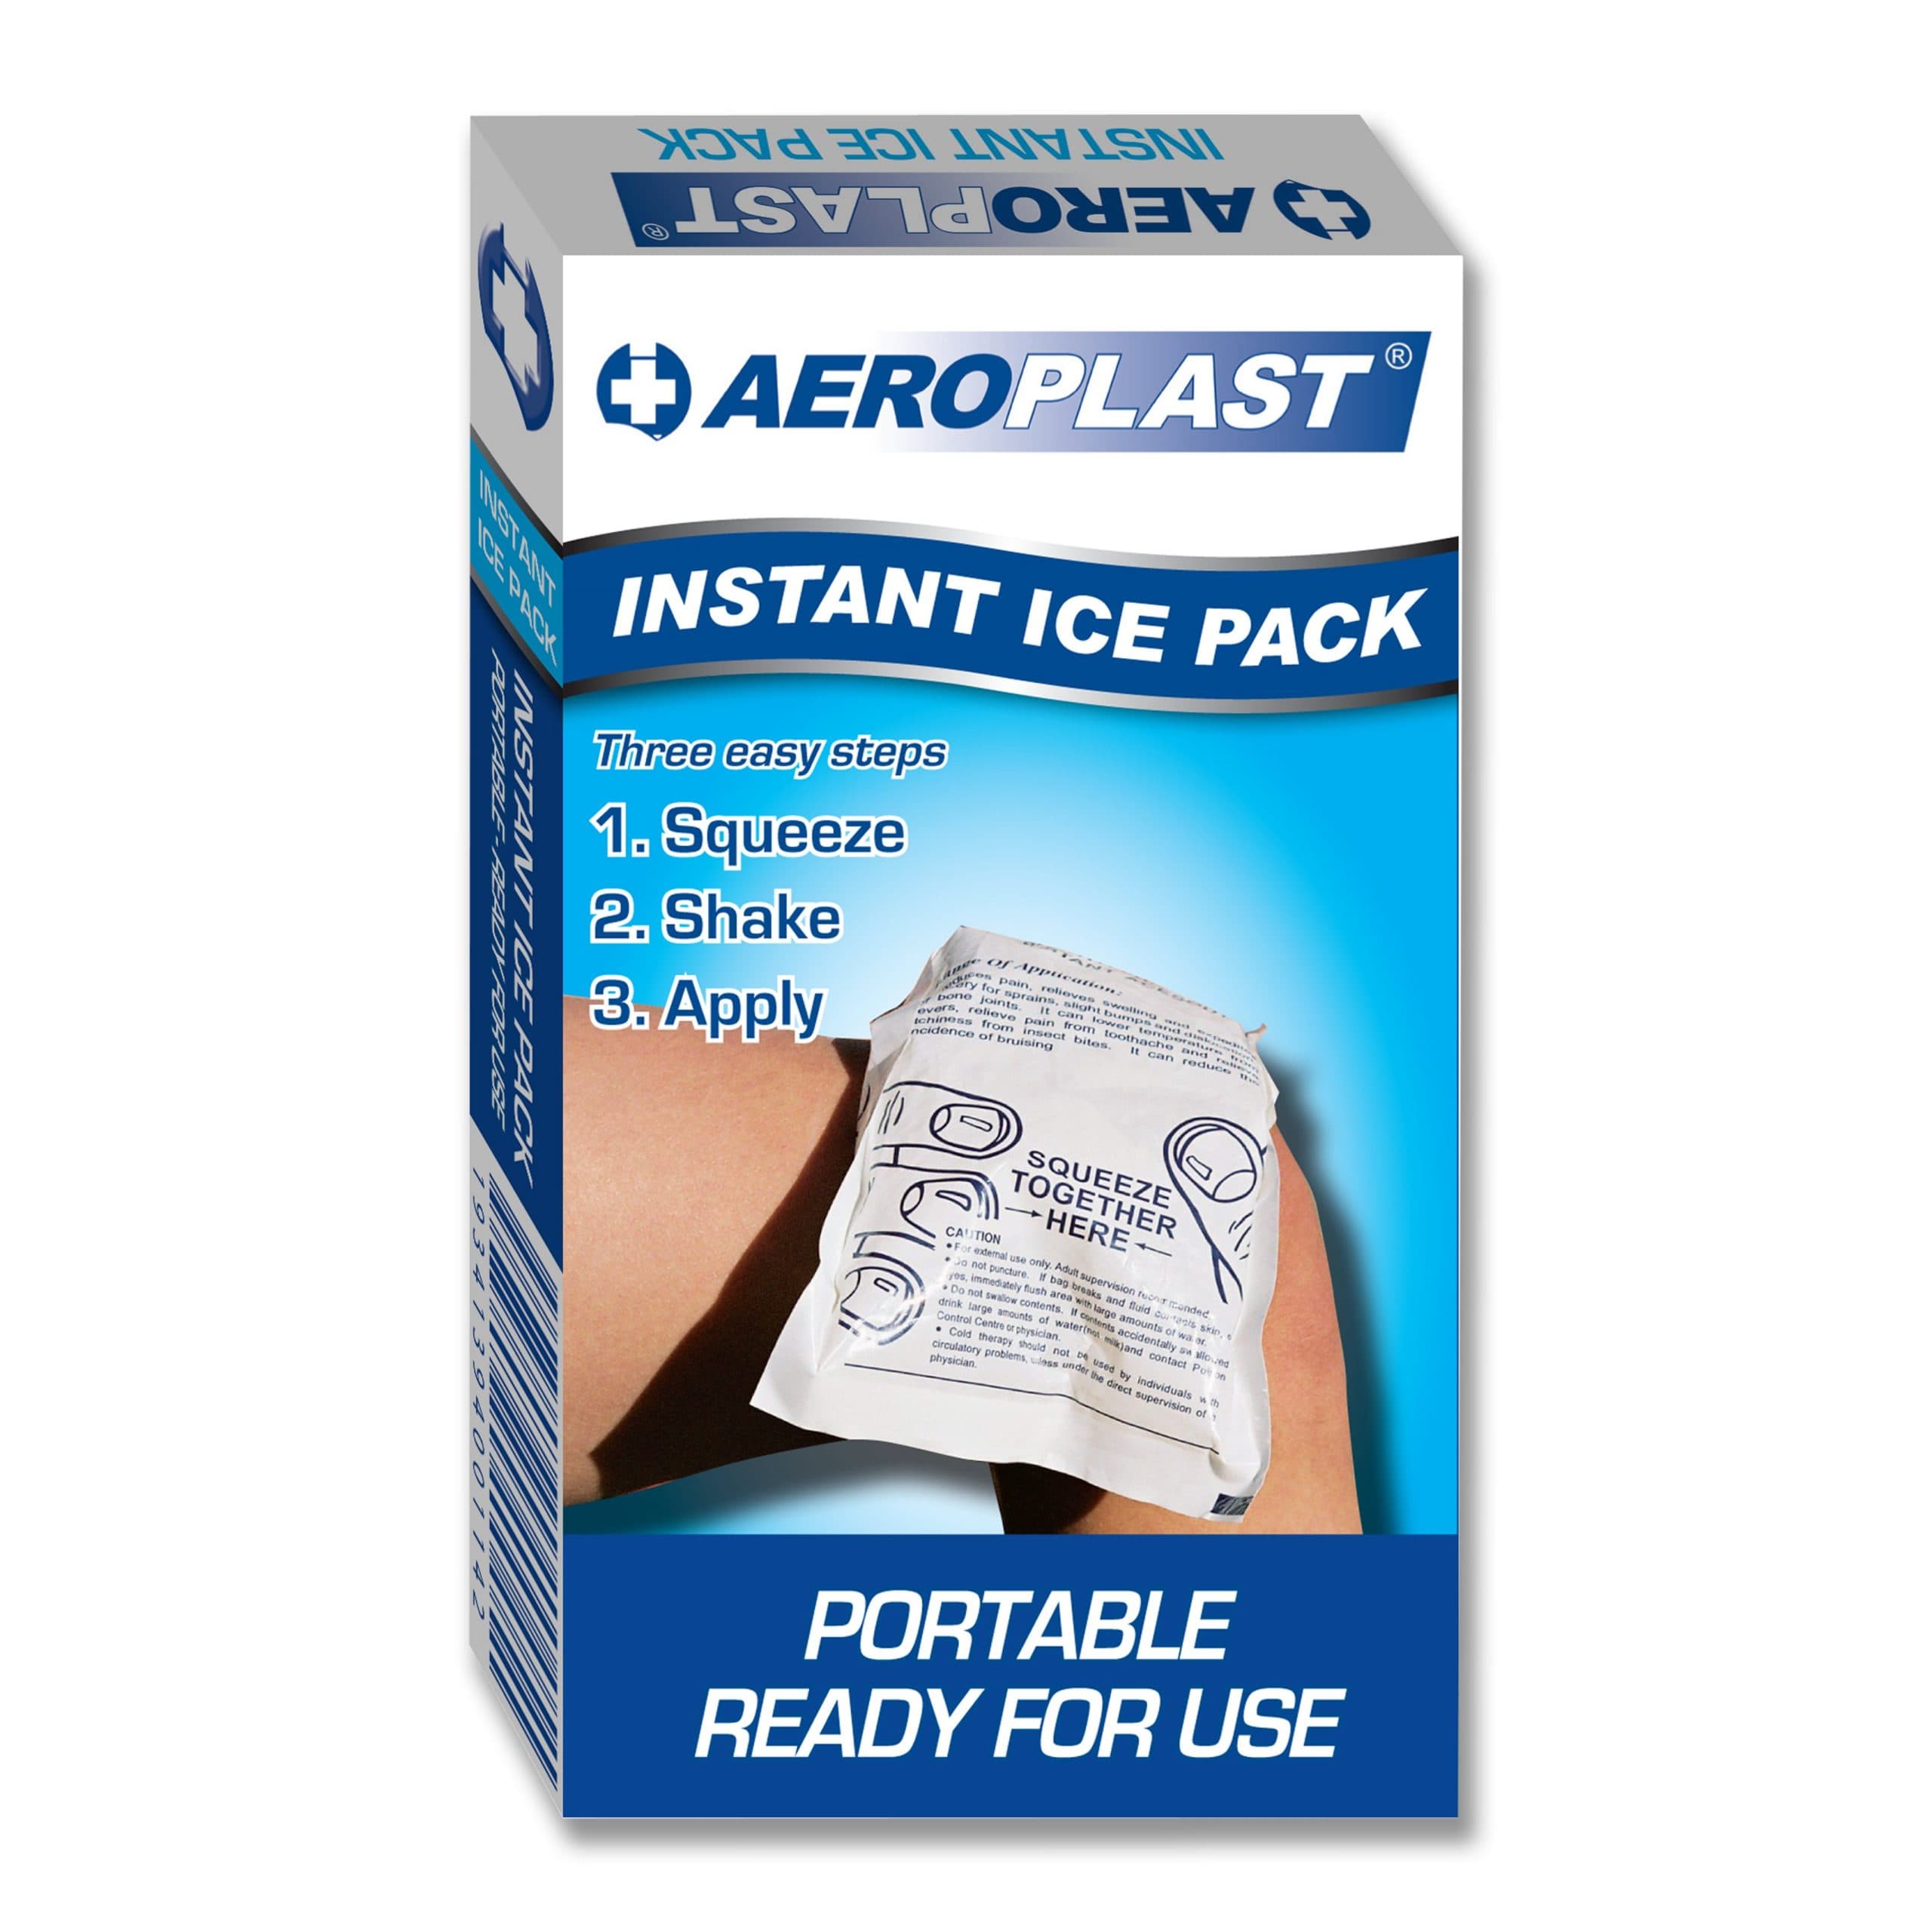 Instant Cold Packs, Cold Therapy, Hot & Cold Therapy